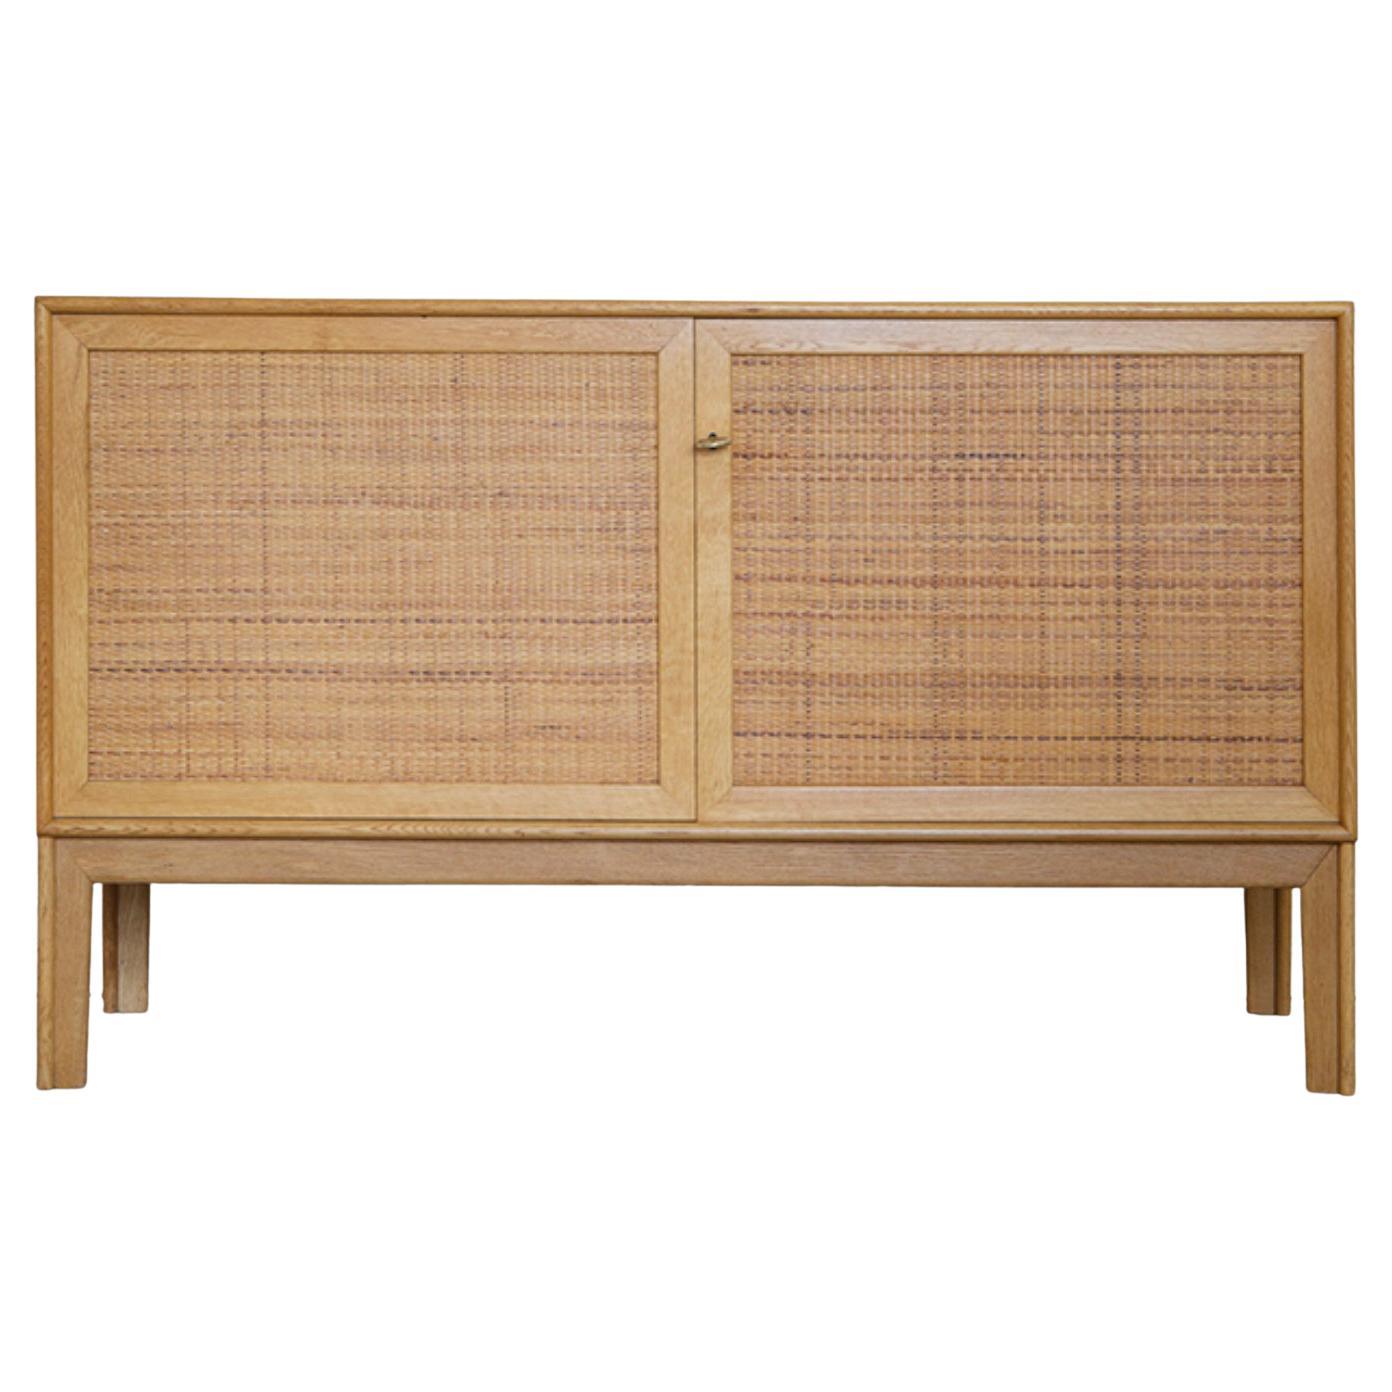 Vintage Alf Svensson Sideboard in Oak and Cane with Two Doors, Sweden, 1950s